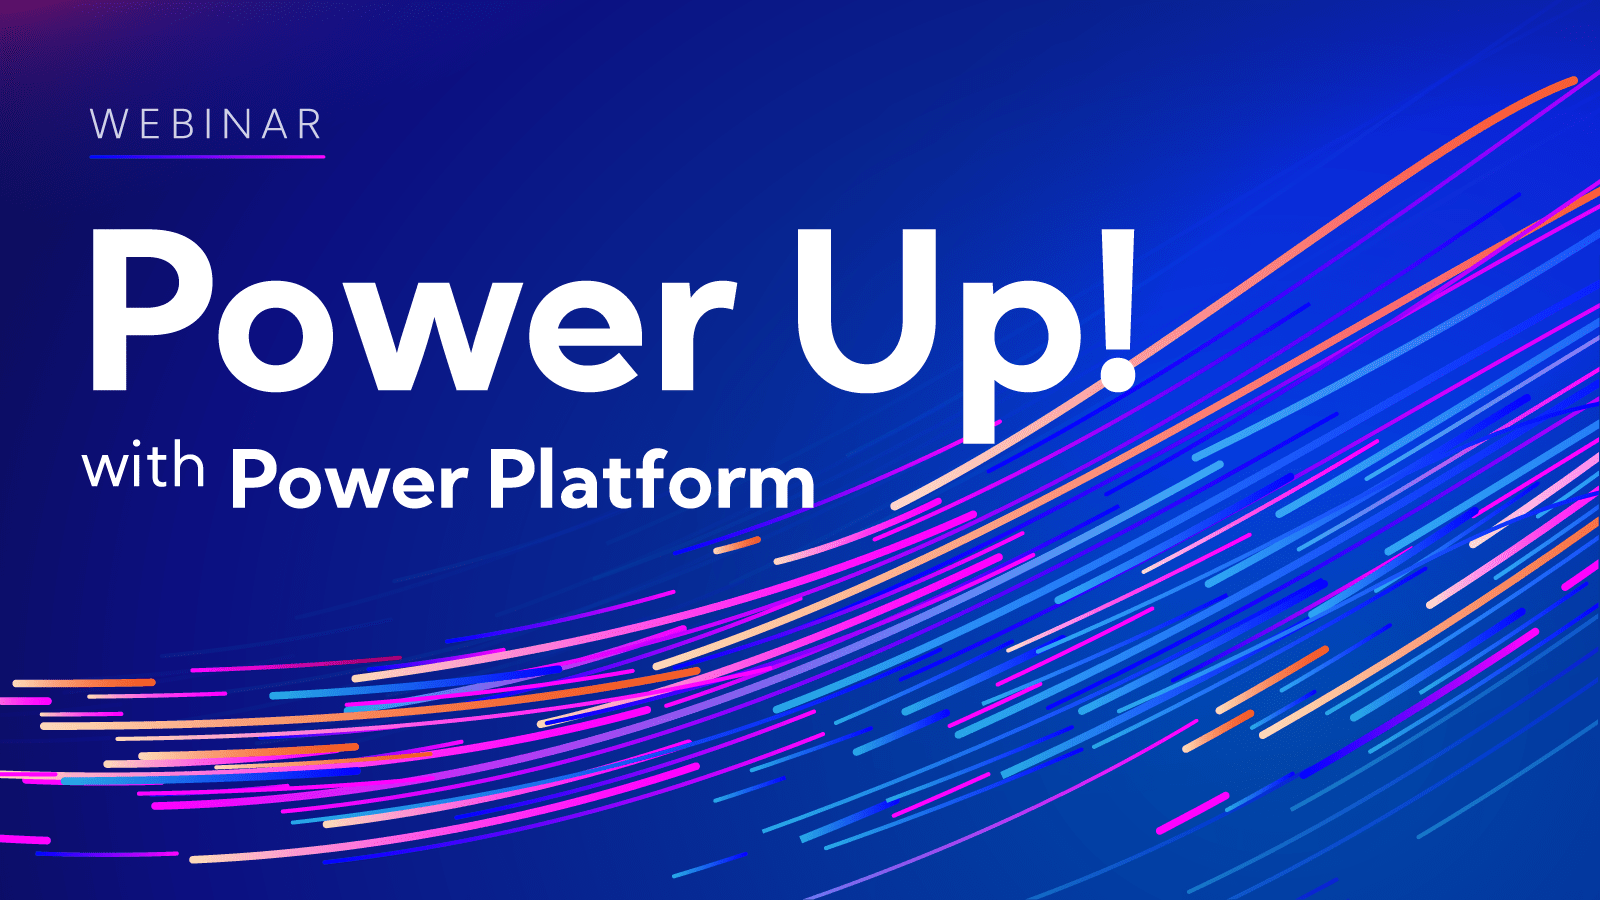 Power Up with Power Platform